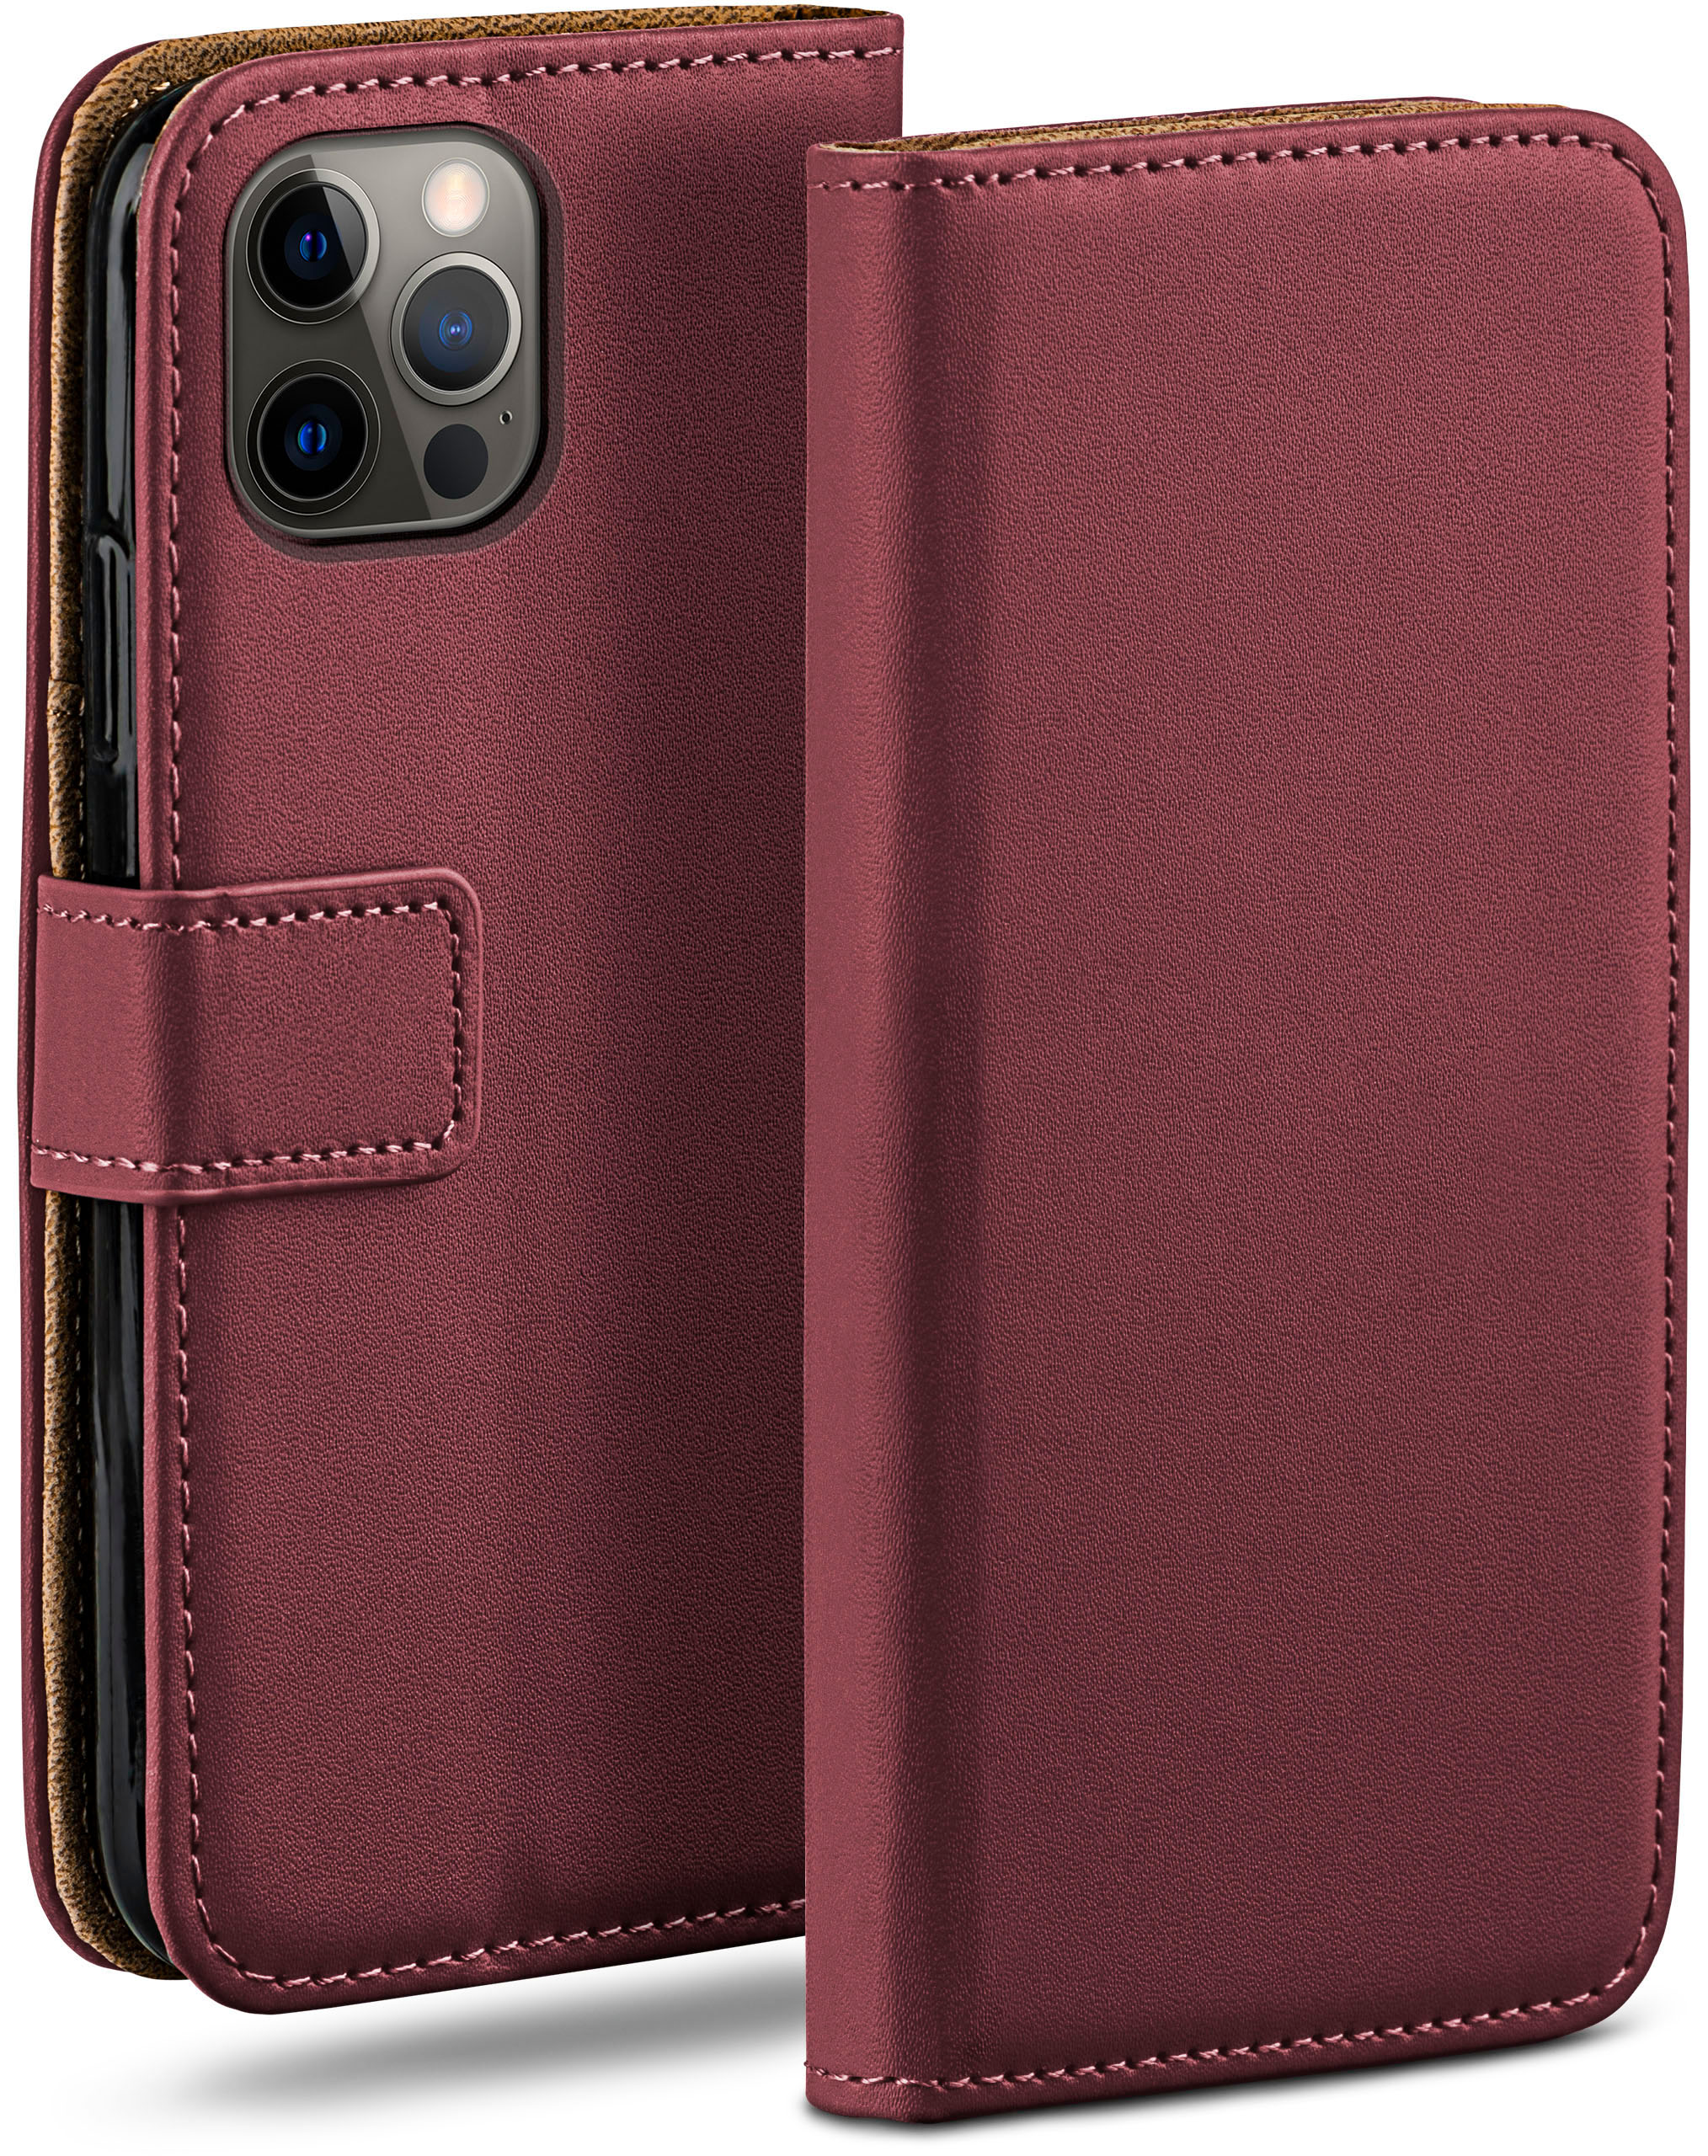 Pro, Case, iPhone Apple, MOEX Maroon-Red Bookcover, Book 12